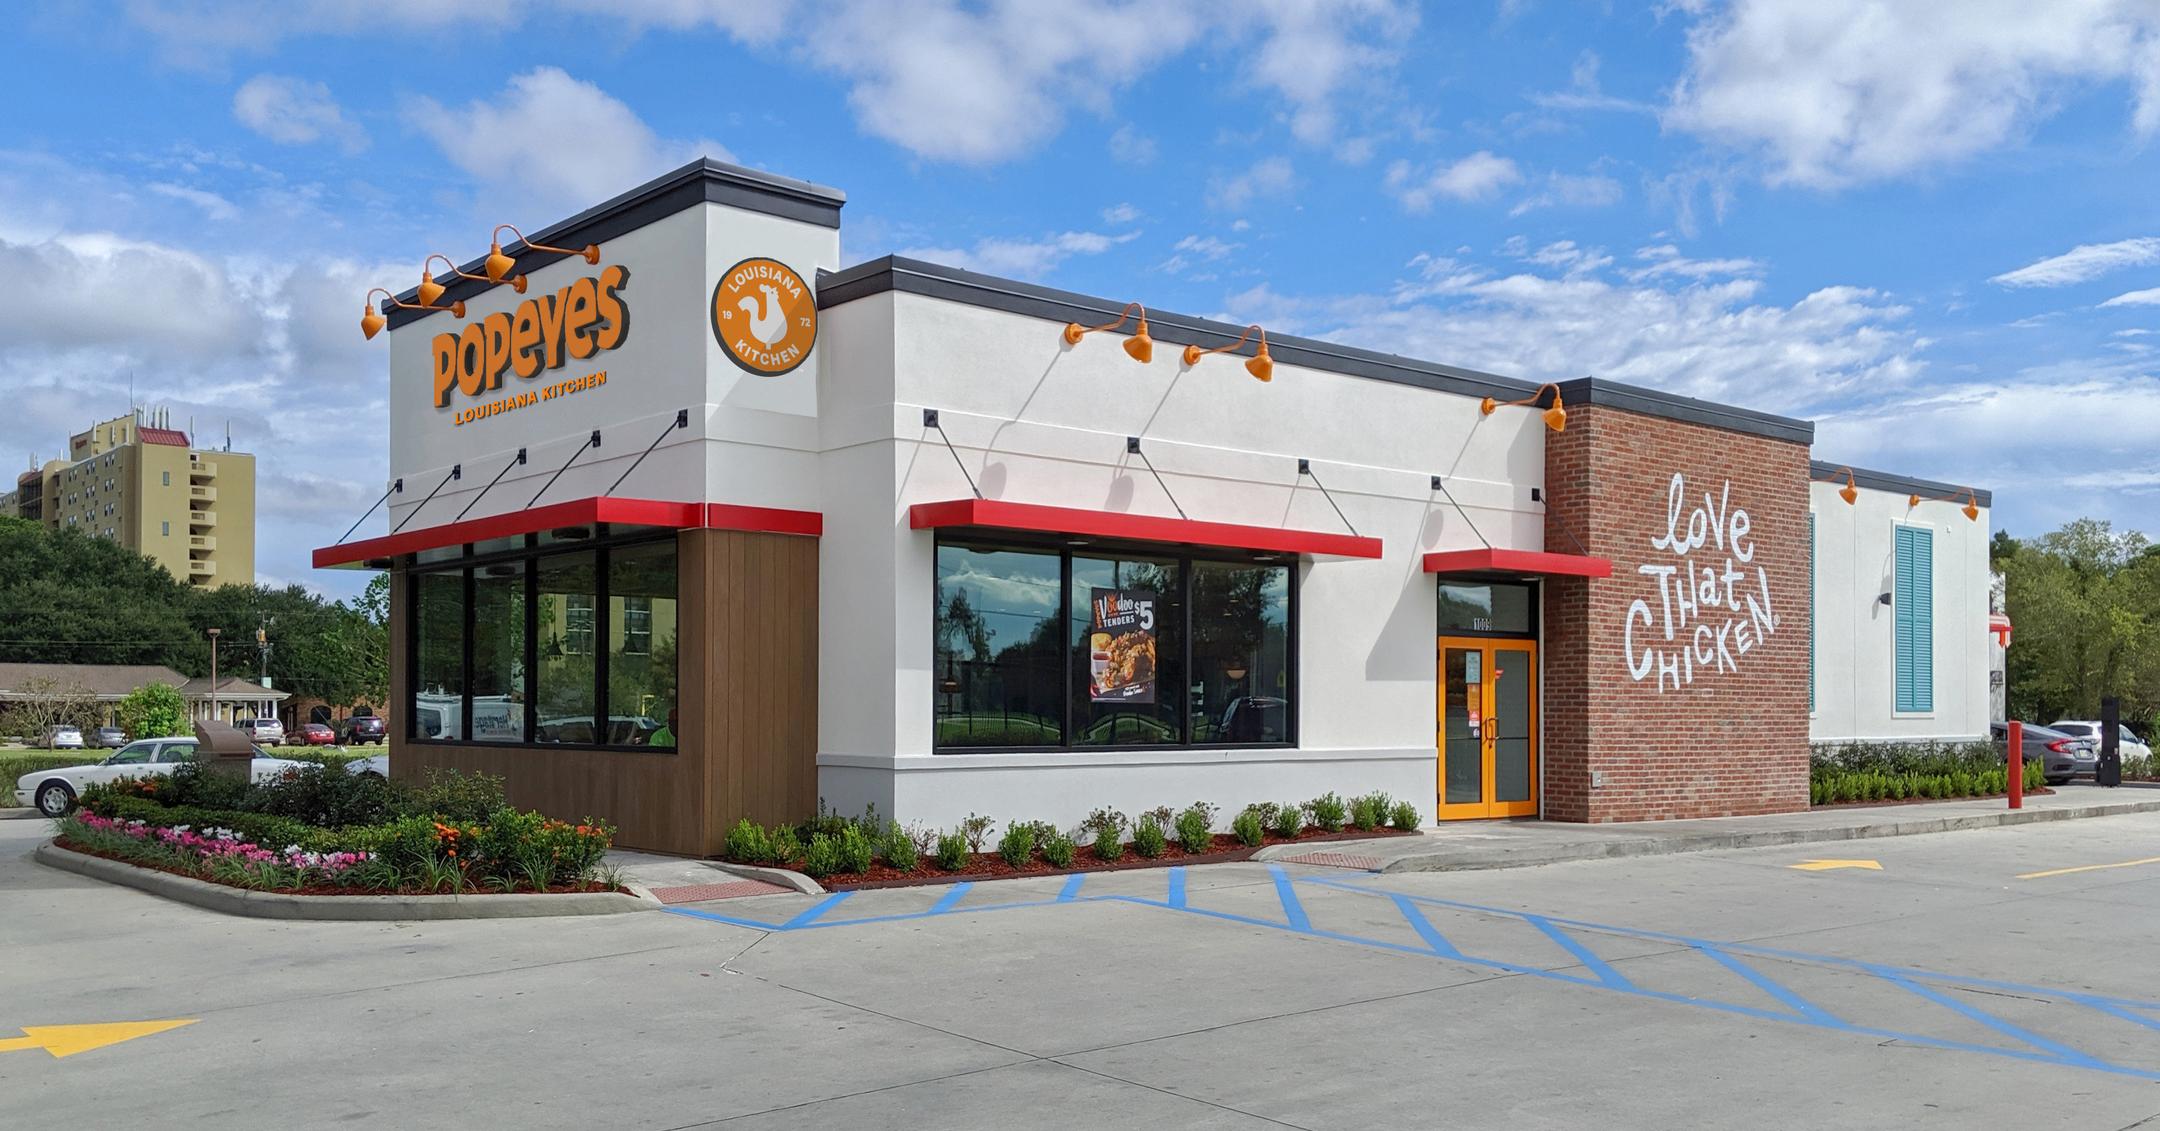 How to Get Popeyes' and Bring Home a Taste of New Orleans